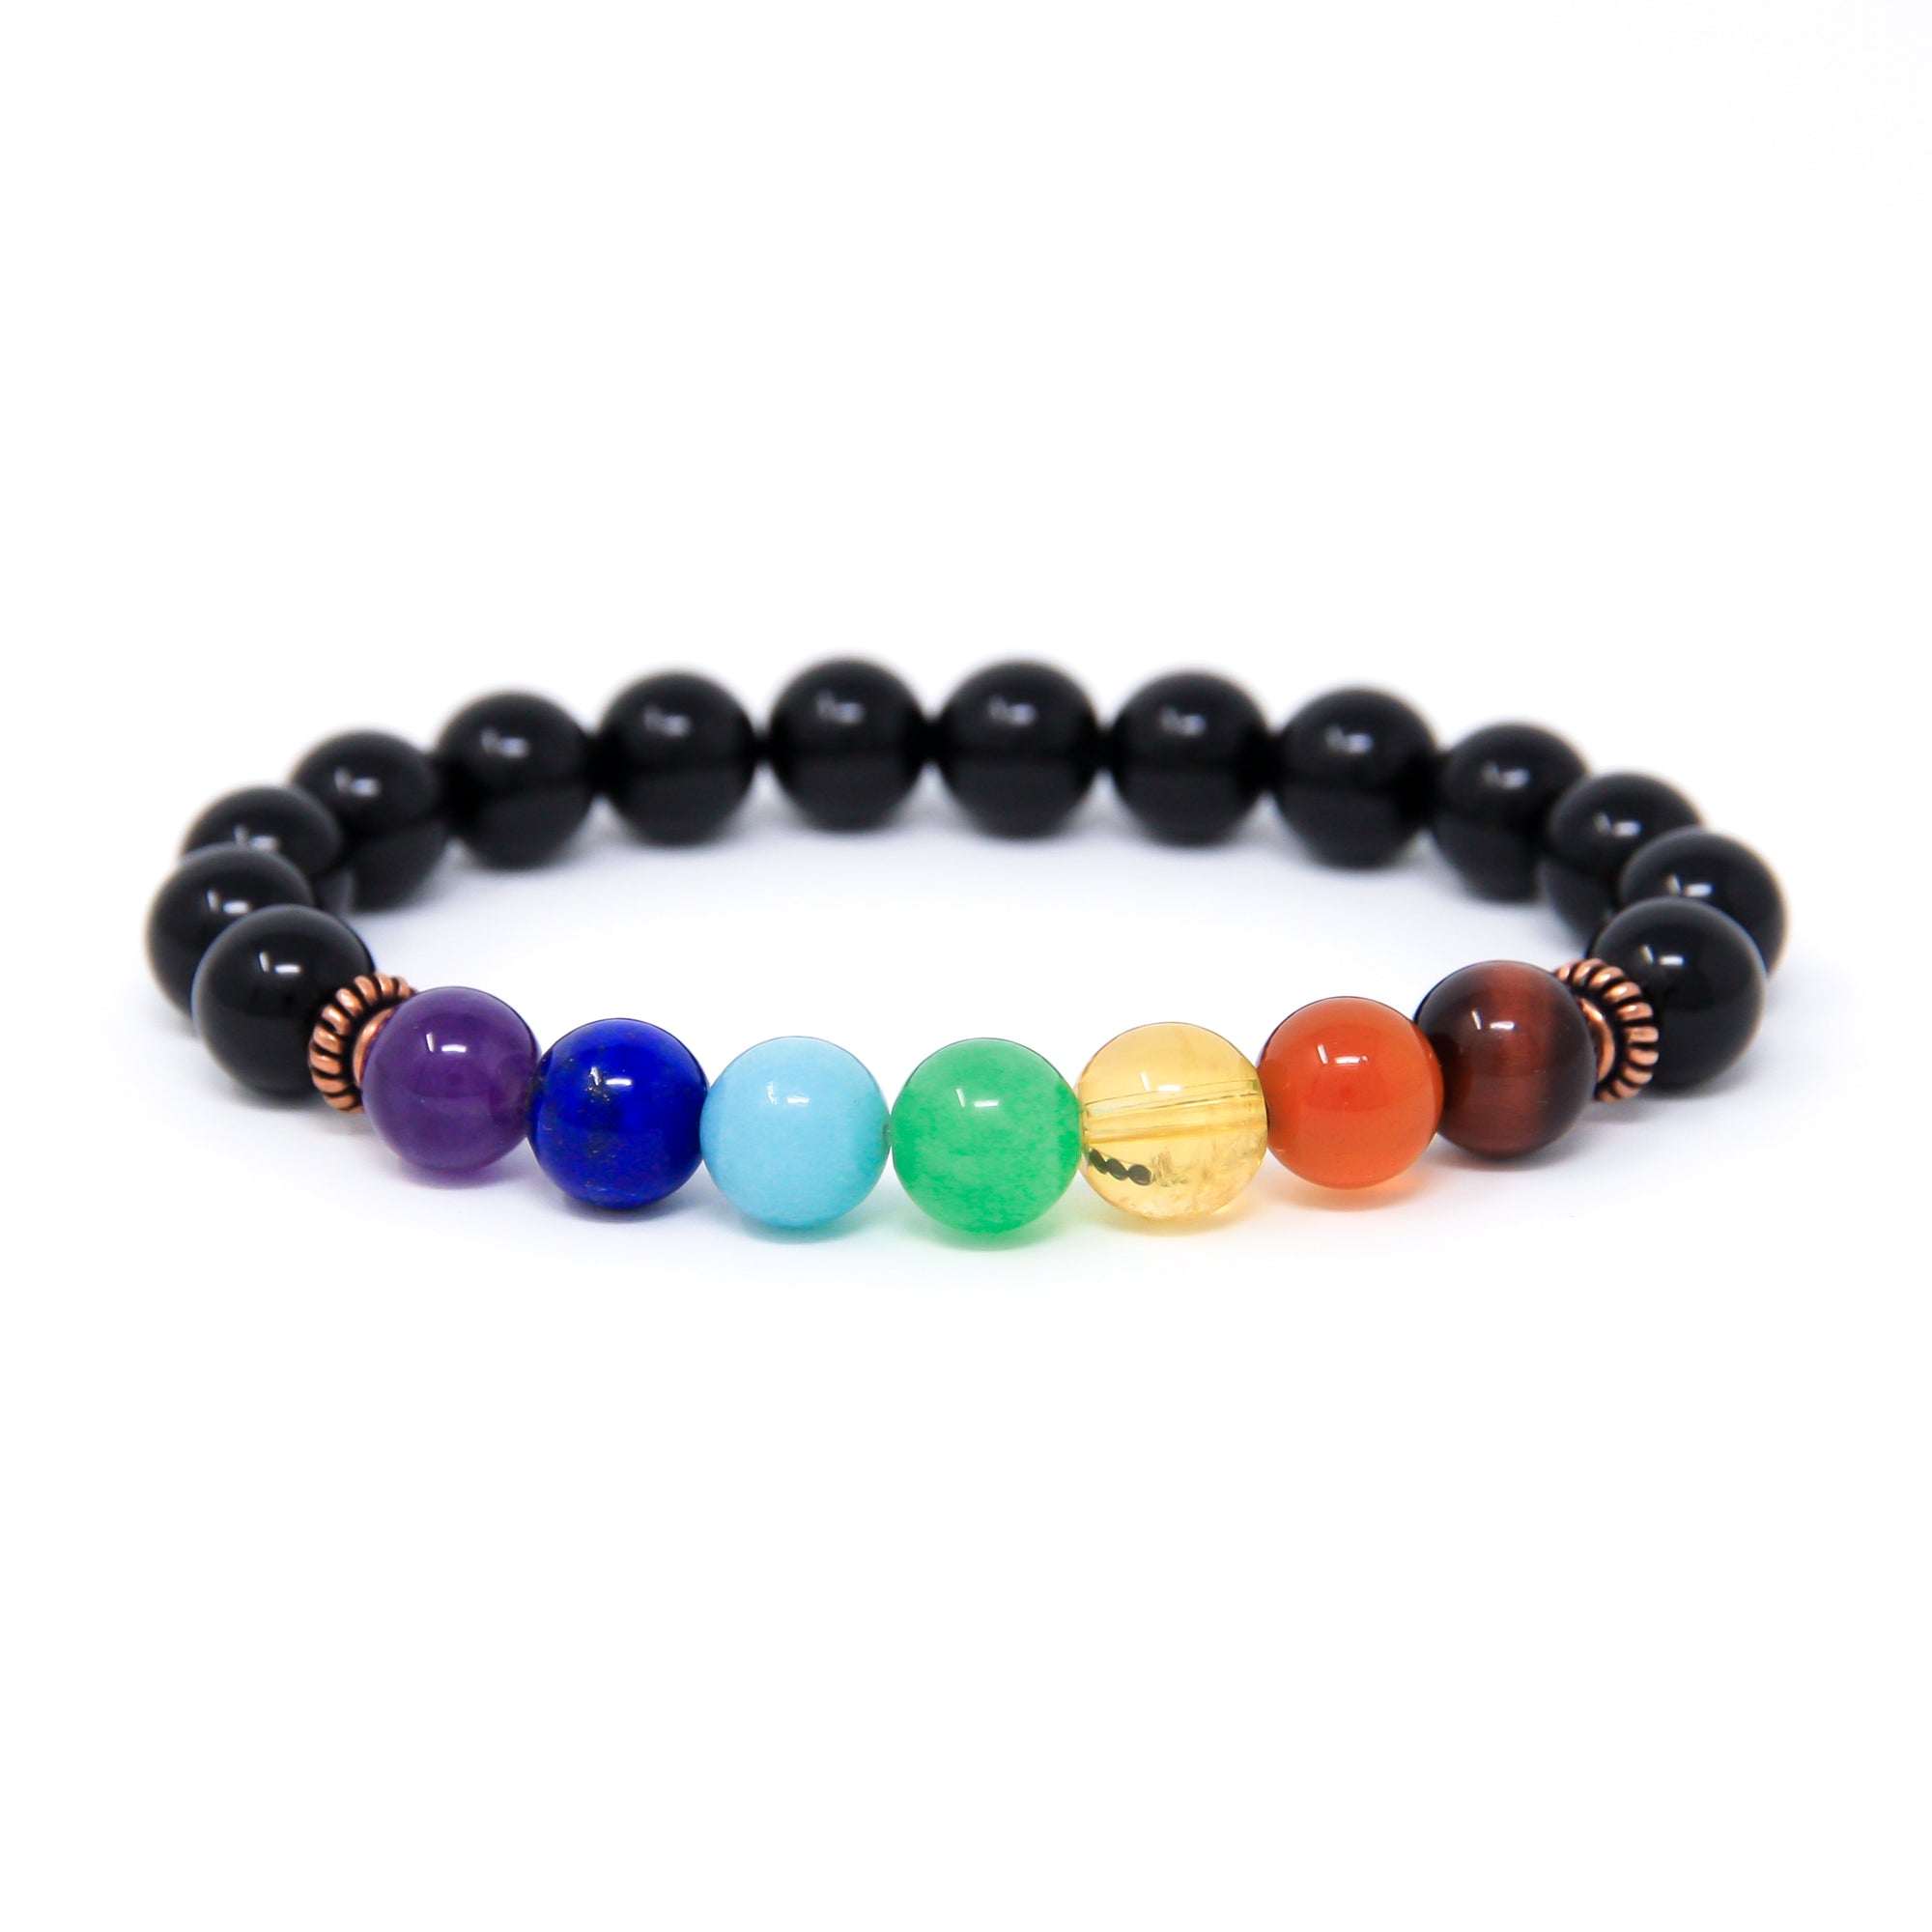 How to Use a Chakra Bracelet and its Benefits: A Beginner's Guide